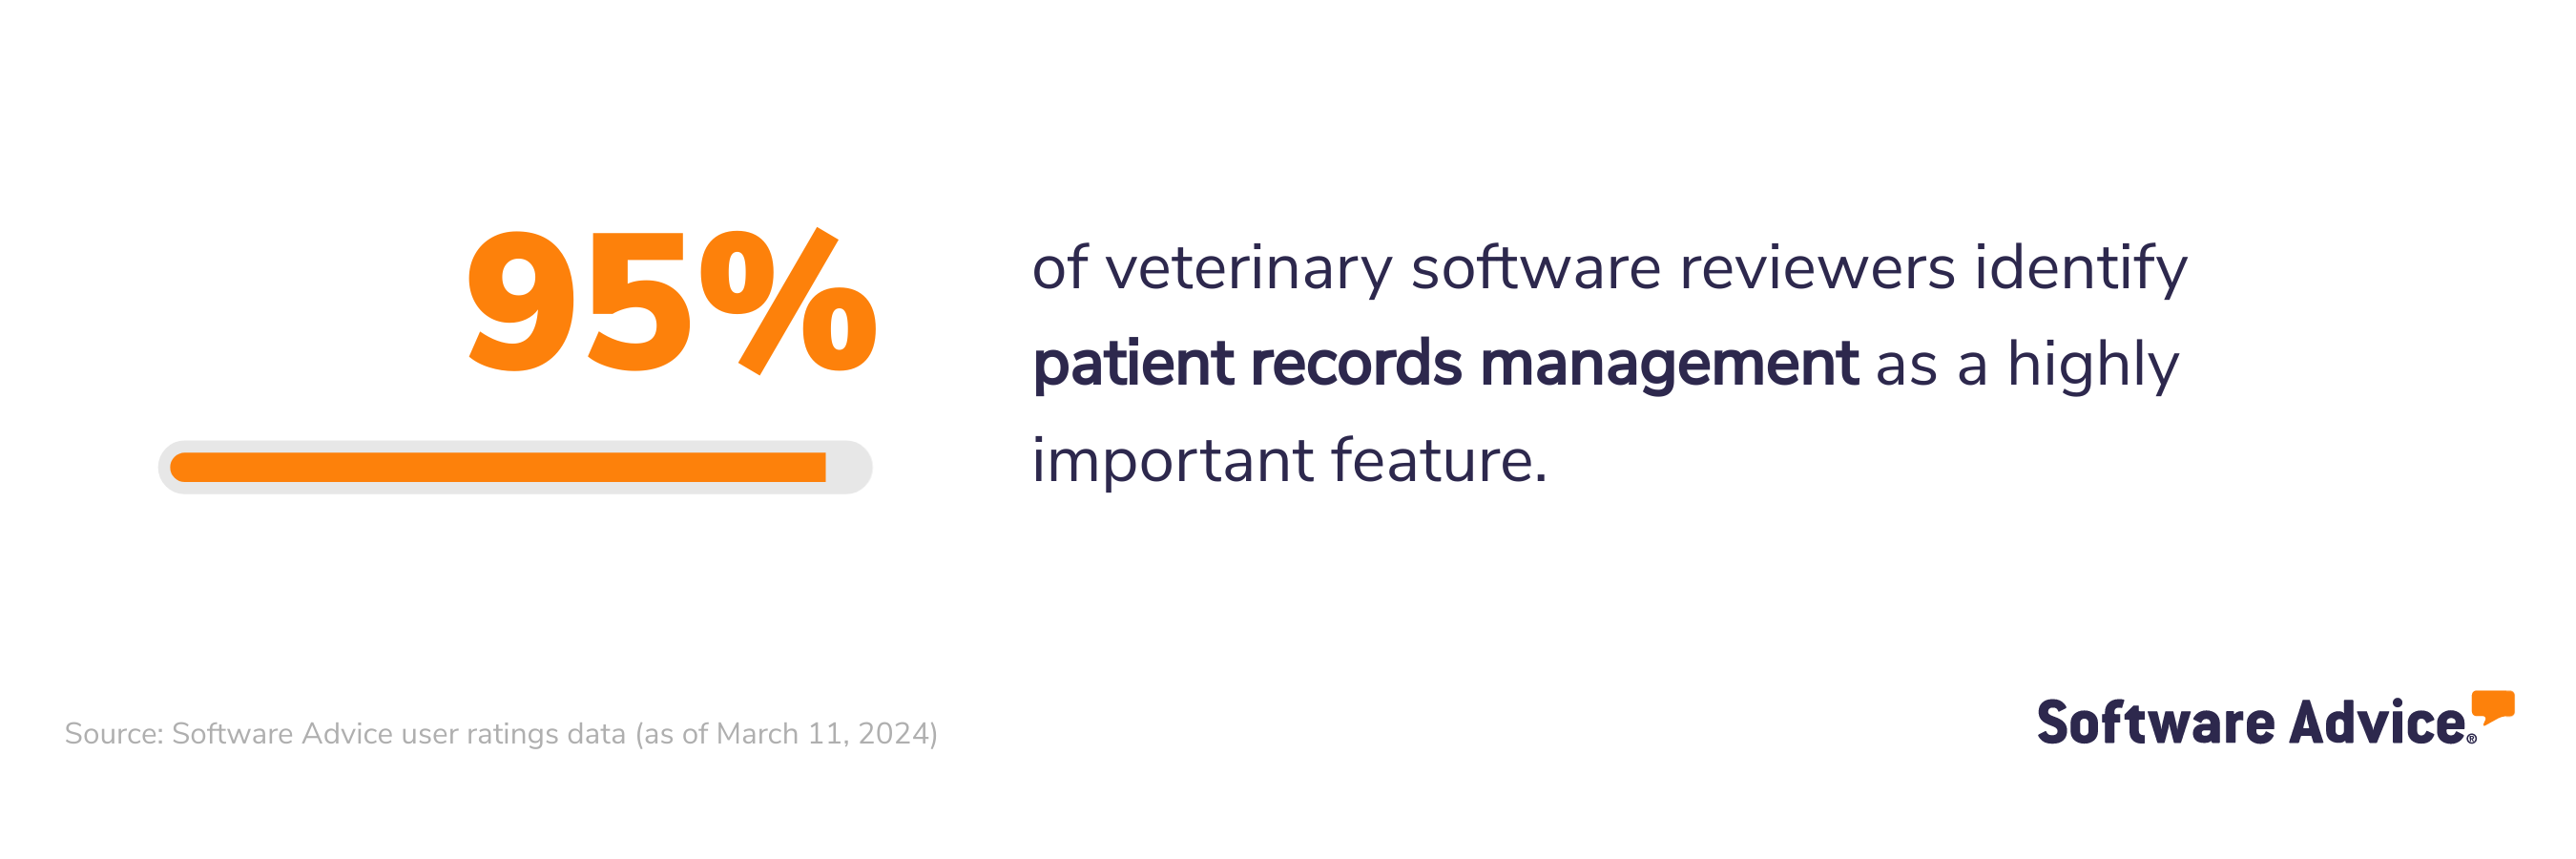 95% of veterinary software reviewers identify patient records management as a highly important feature.